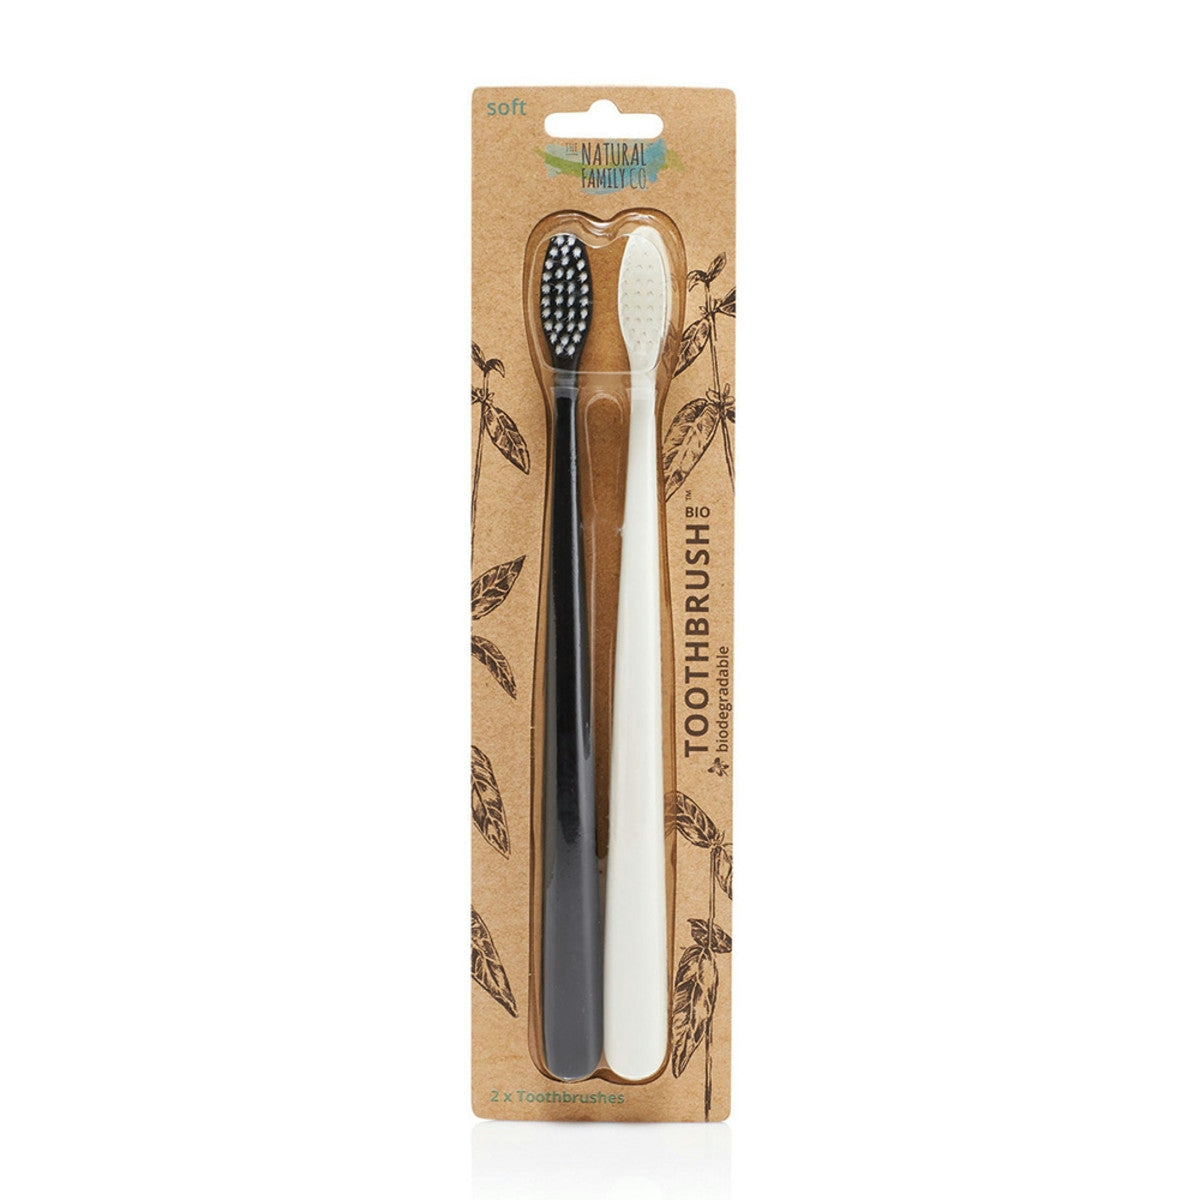 image of The Natural Family Co. Bio Toothbrush Ivory Desert & Pirate Black Twin Pack on white background